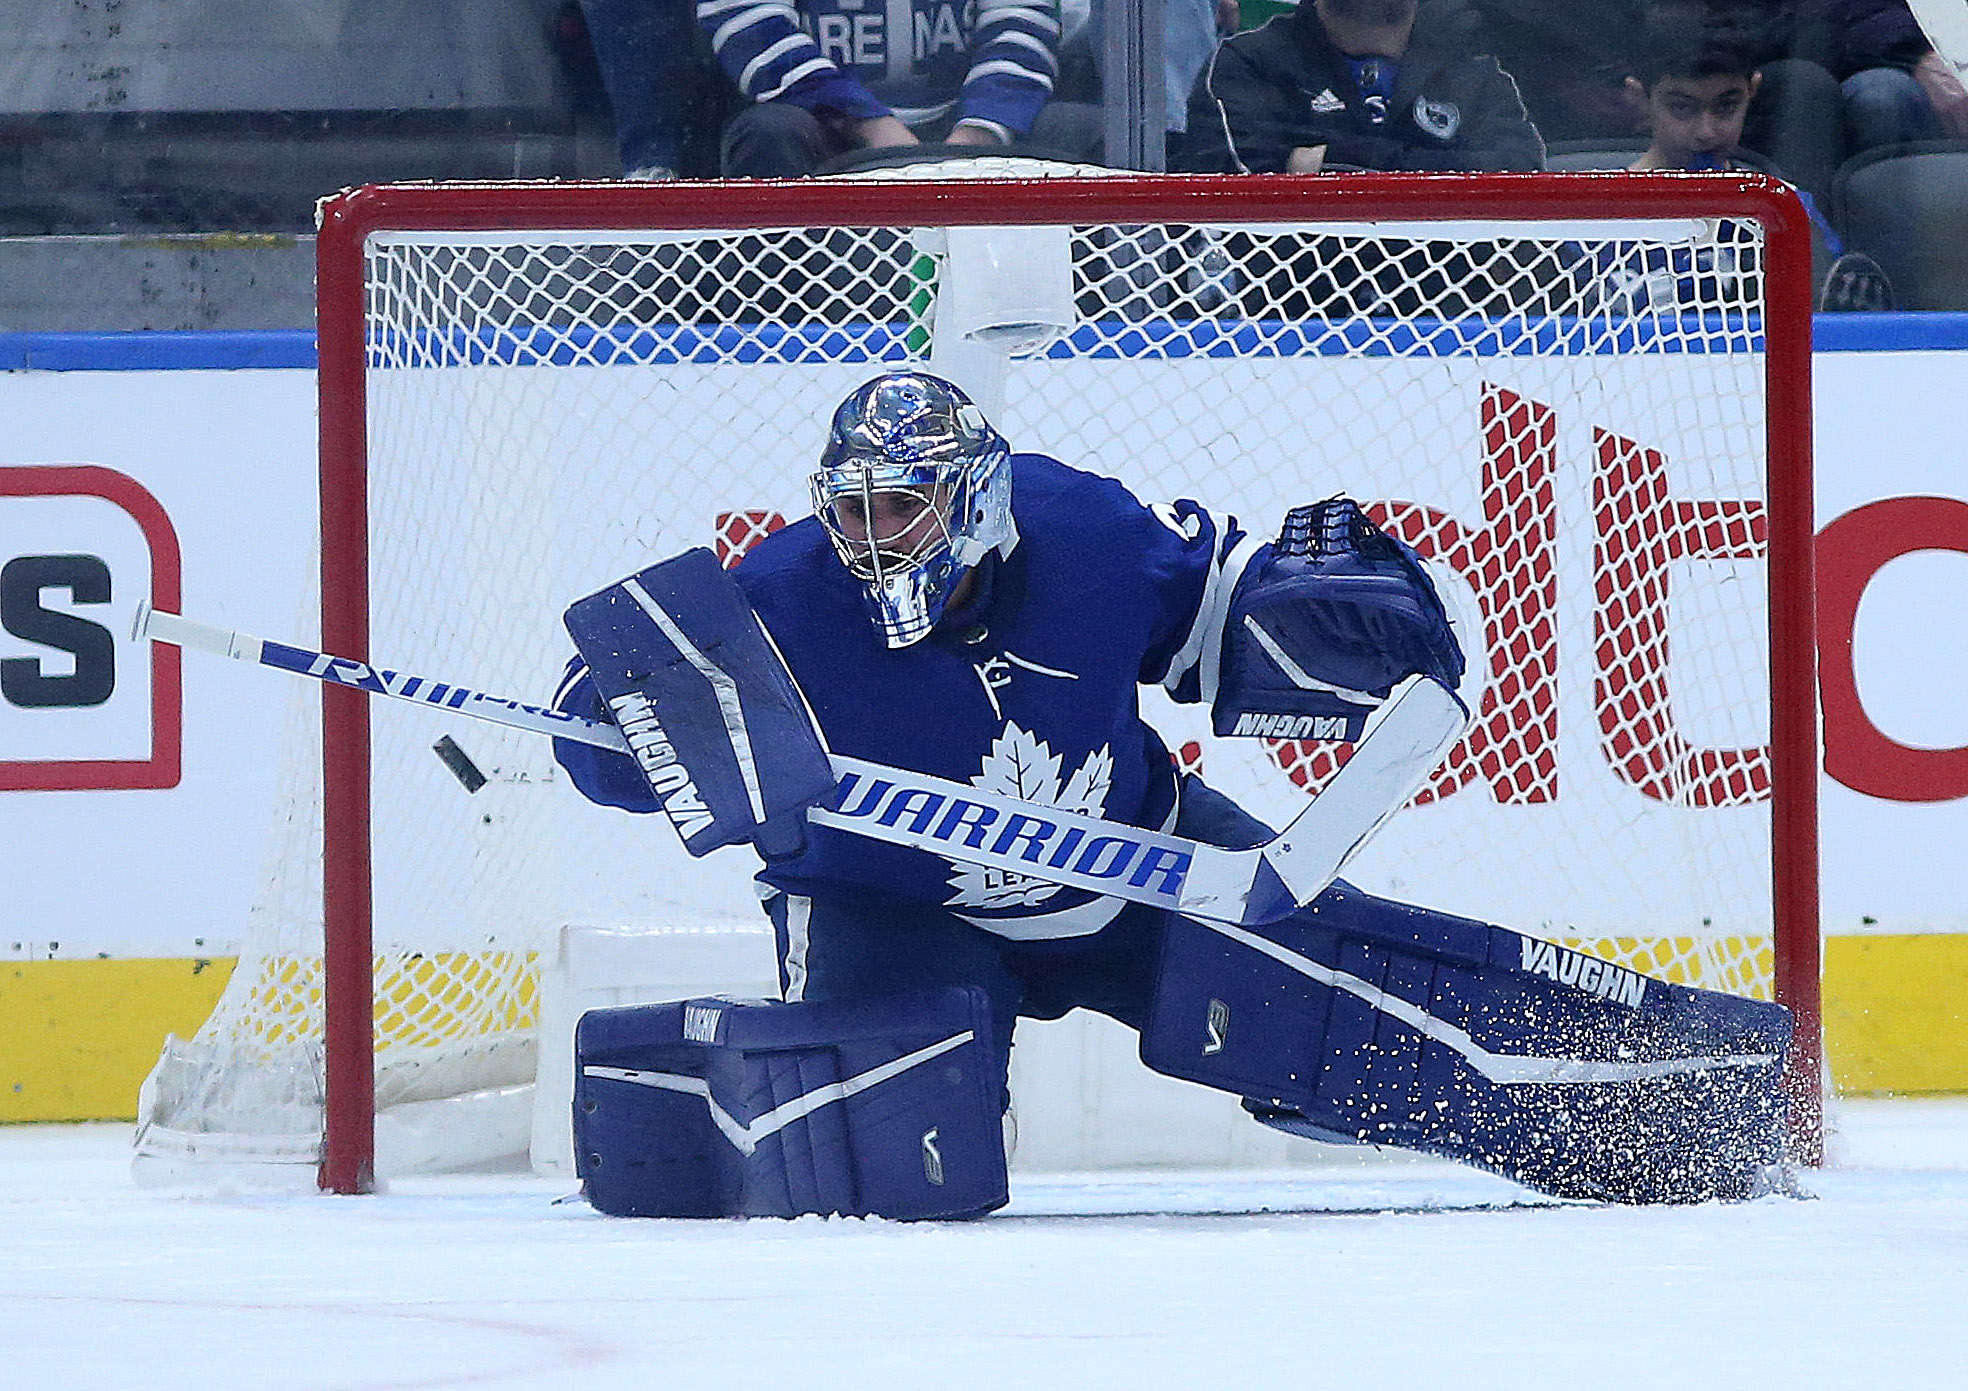 Toronto Maple Leafs beat the Florida Panthers 5-2